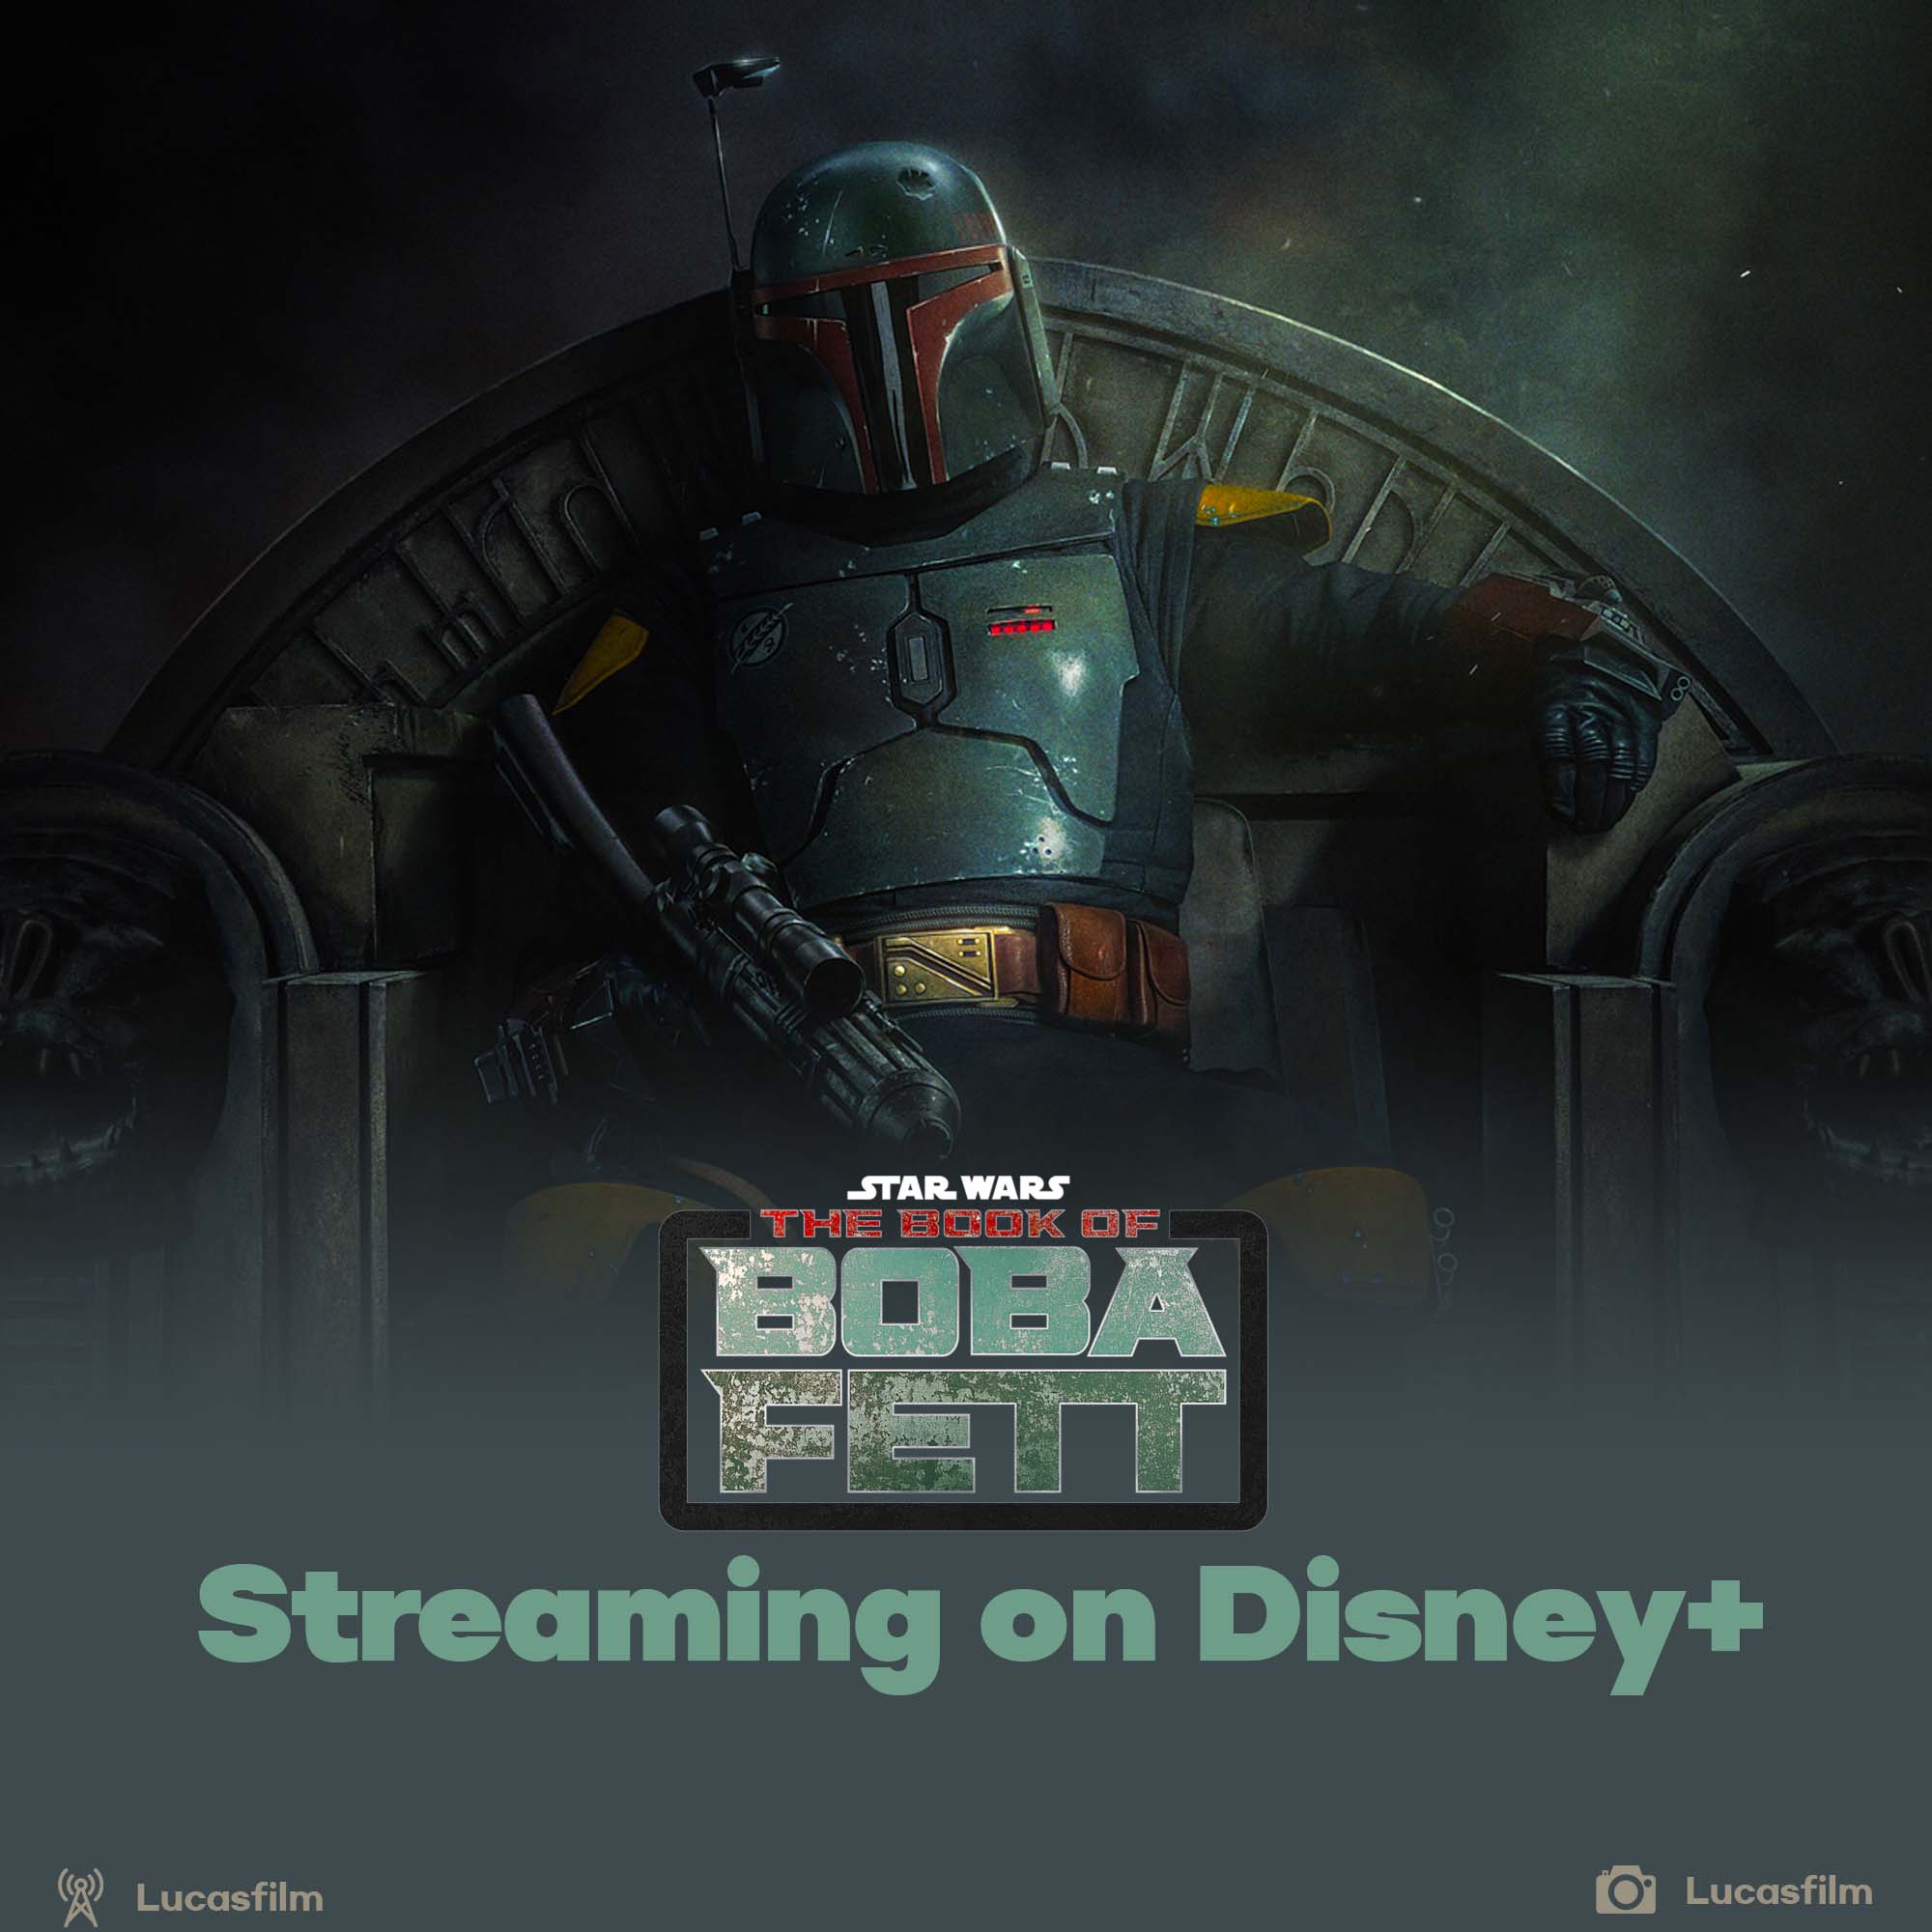 Book of Boba Fett is streaming now on Disney+